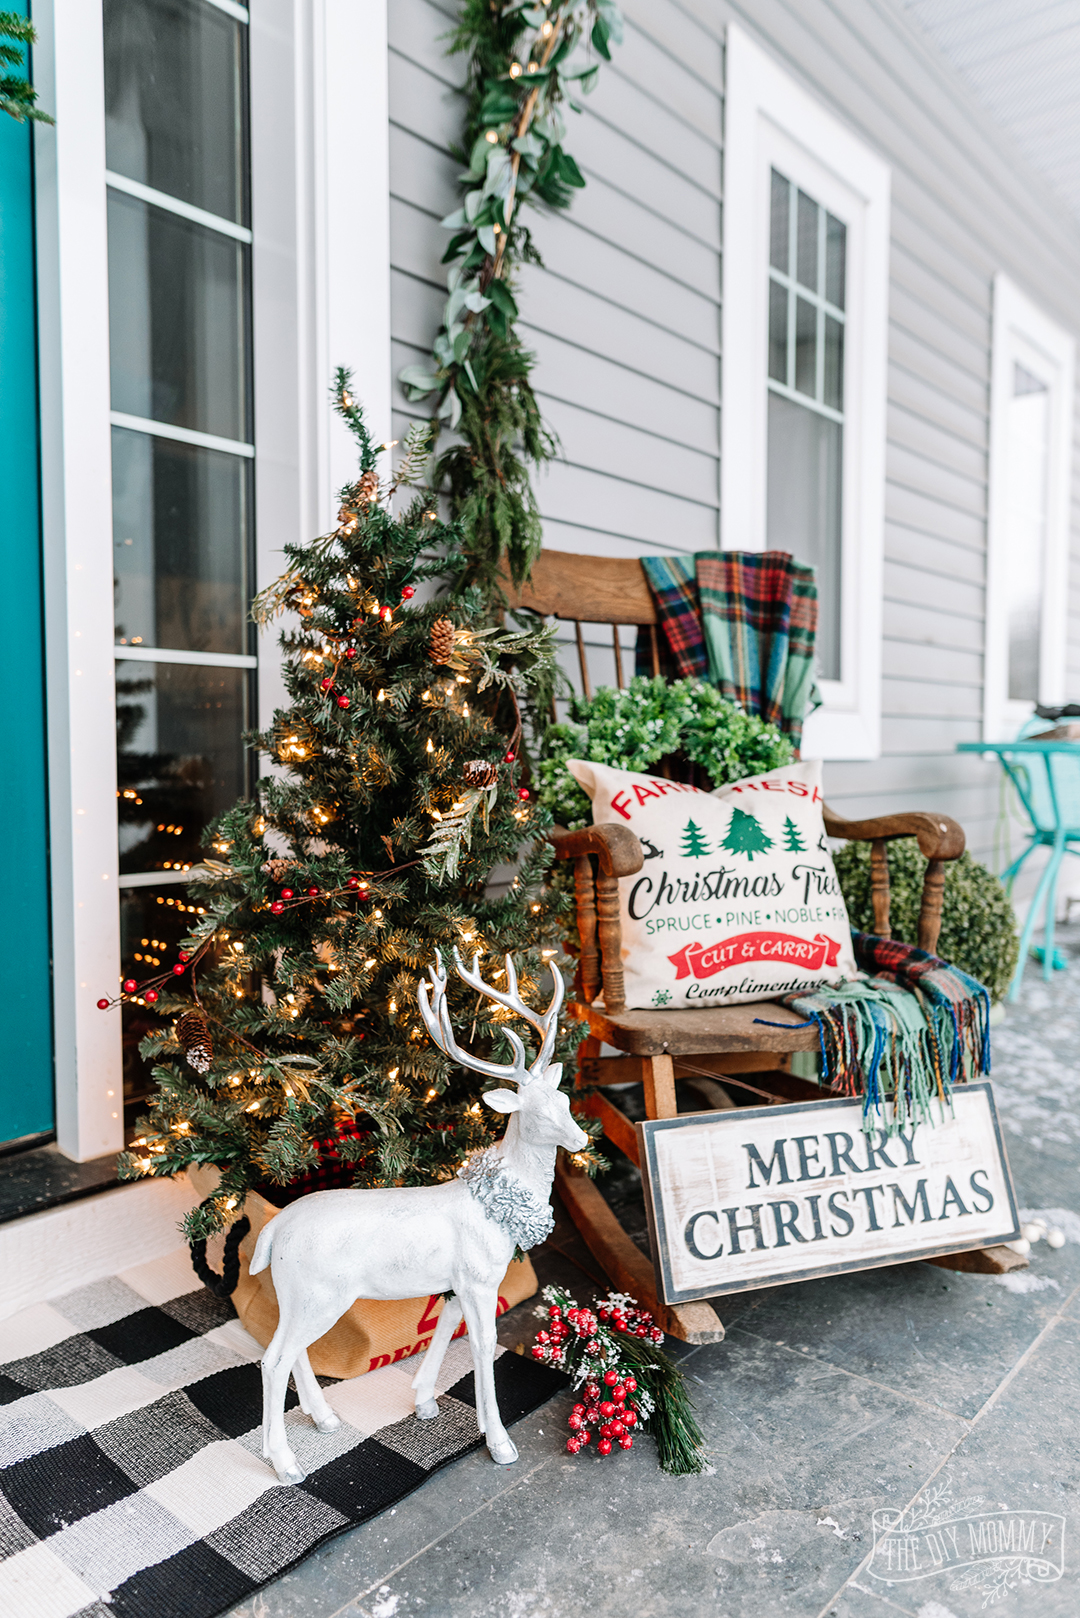 Christmas front porch in traditional farmhouse decor in reds, greens and teal colors